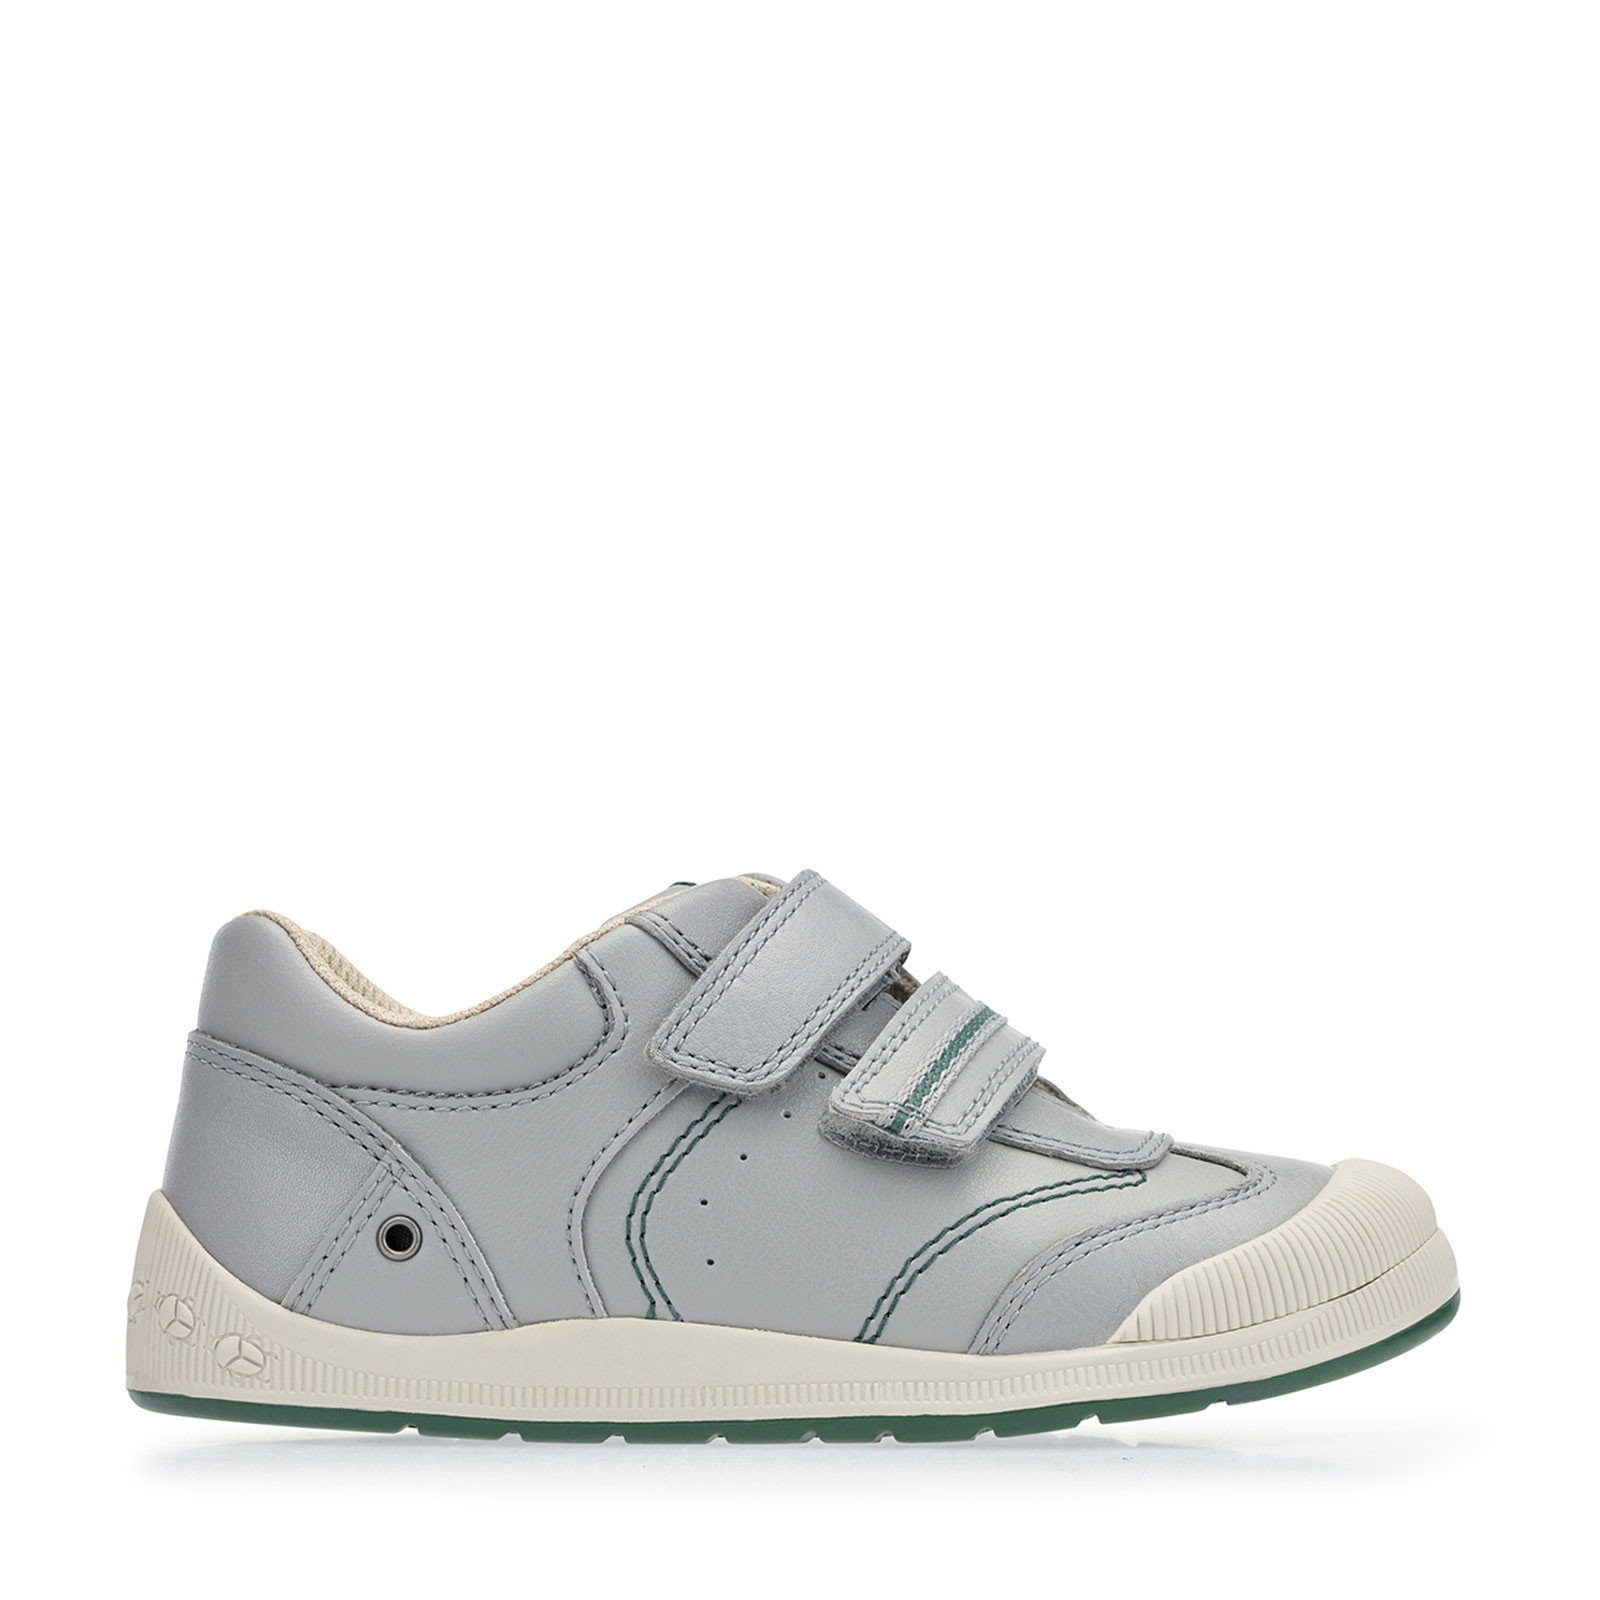 Boys Startrite 'Tough Bug' Fst Casual Shoes